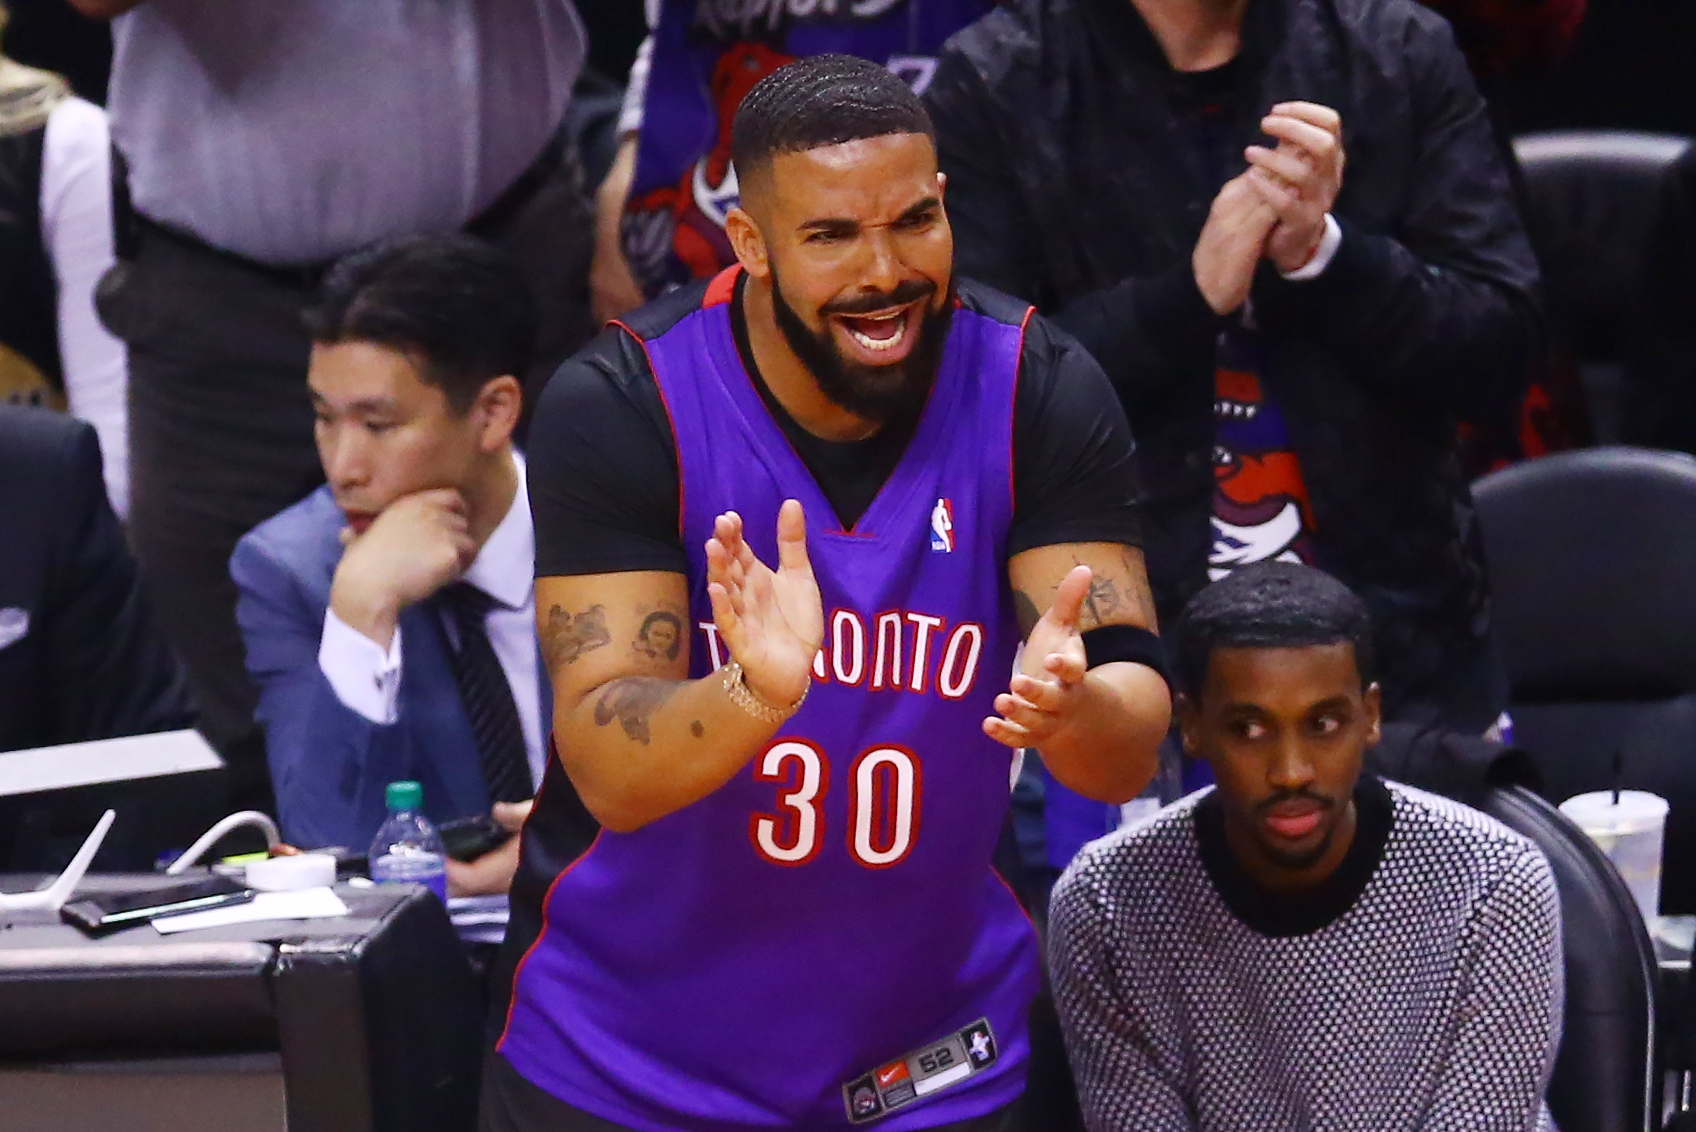 NBA commish tells Drake: there are lines 'that shouldn't be crossed